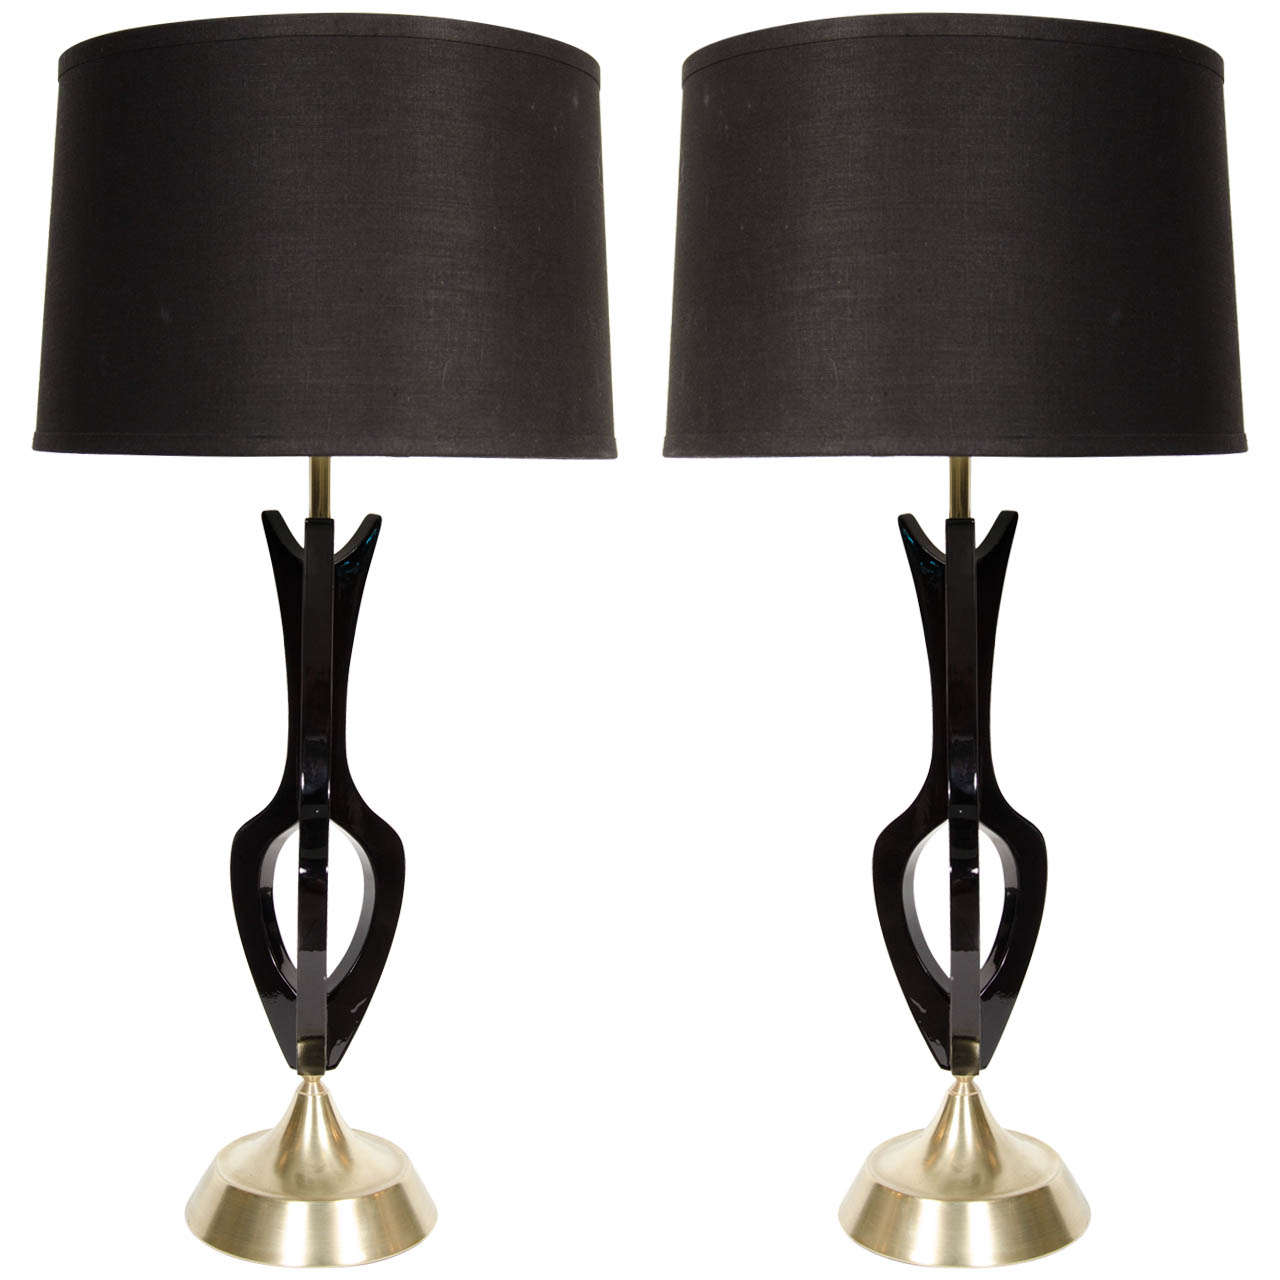 Sculptural Pair of Mid-Century Modernist Table Lamps